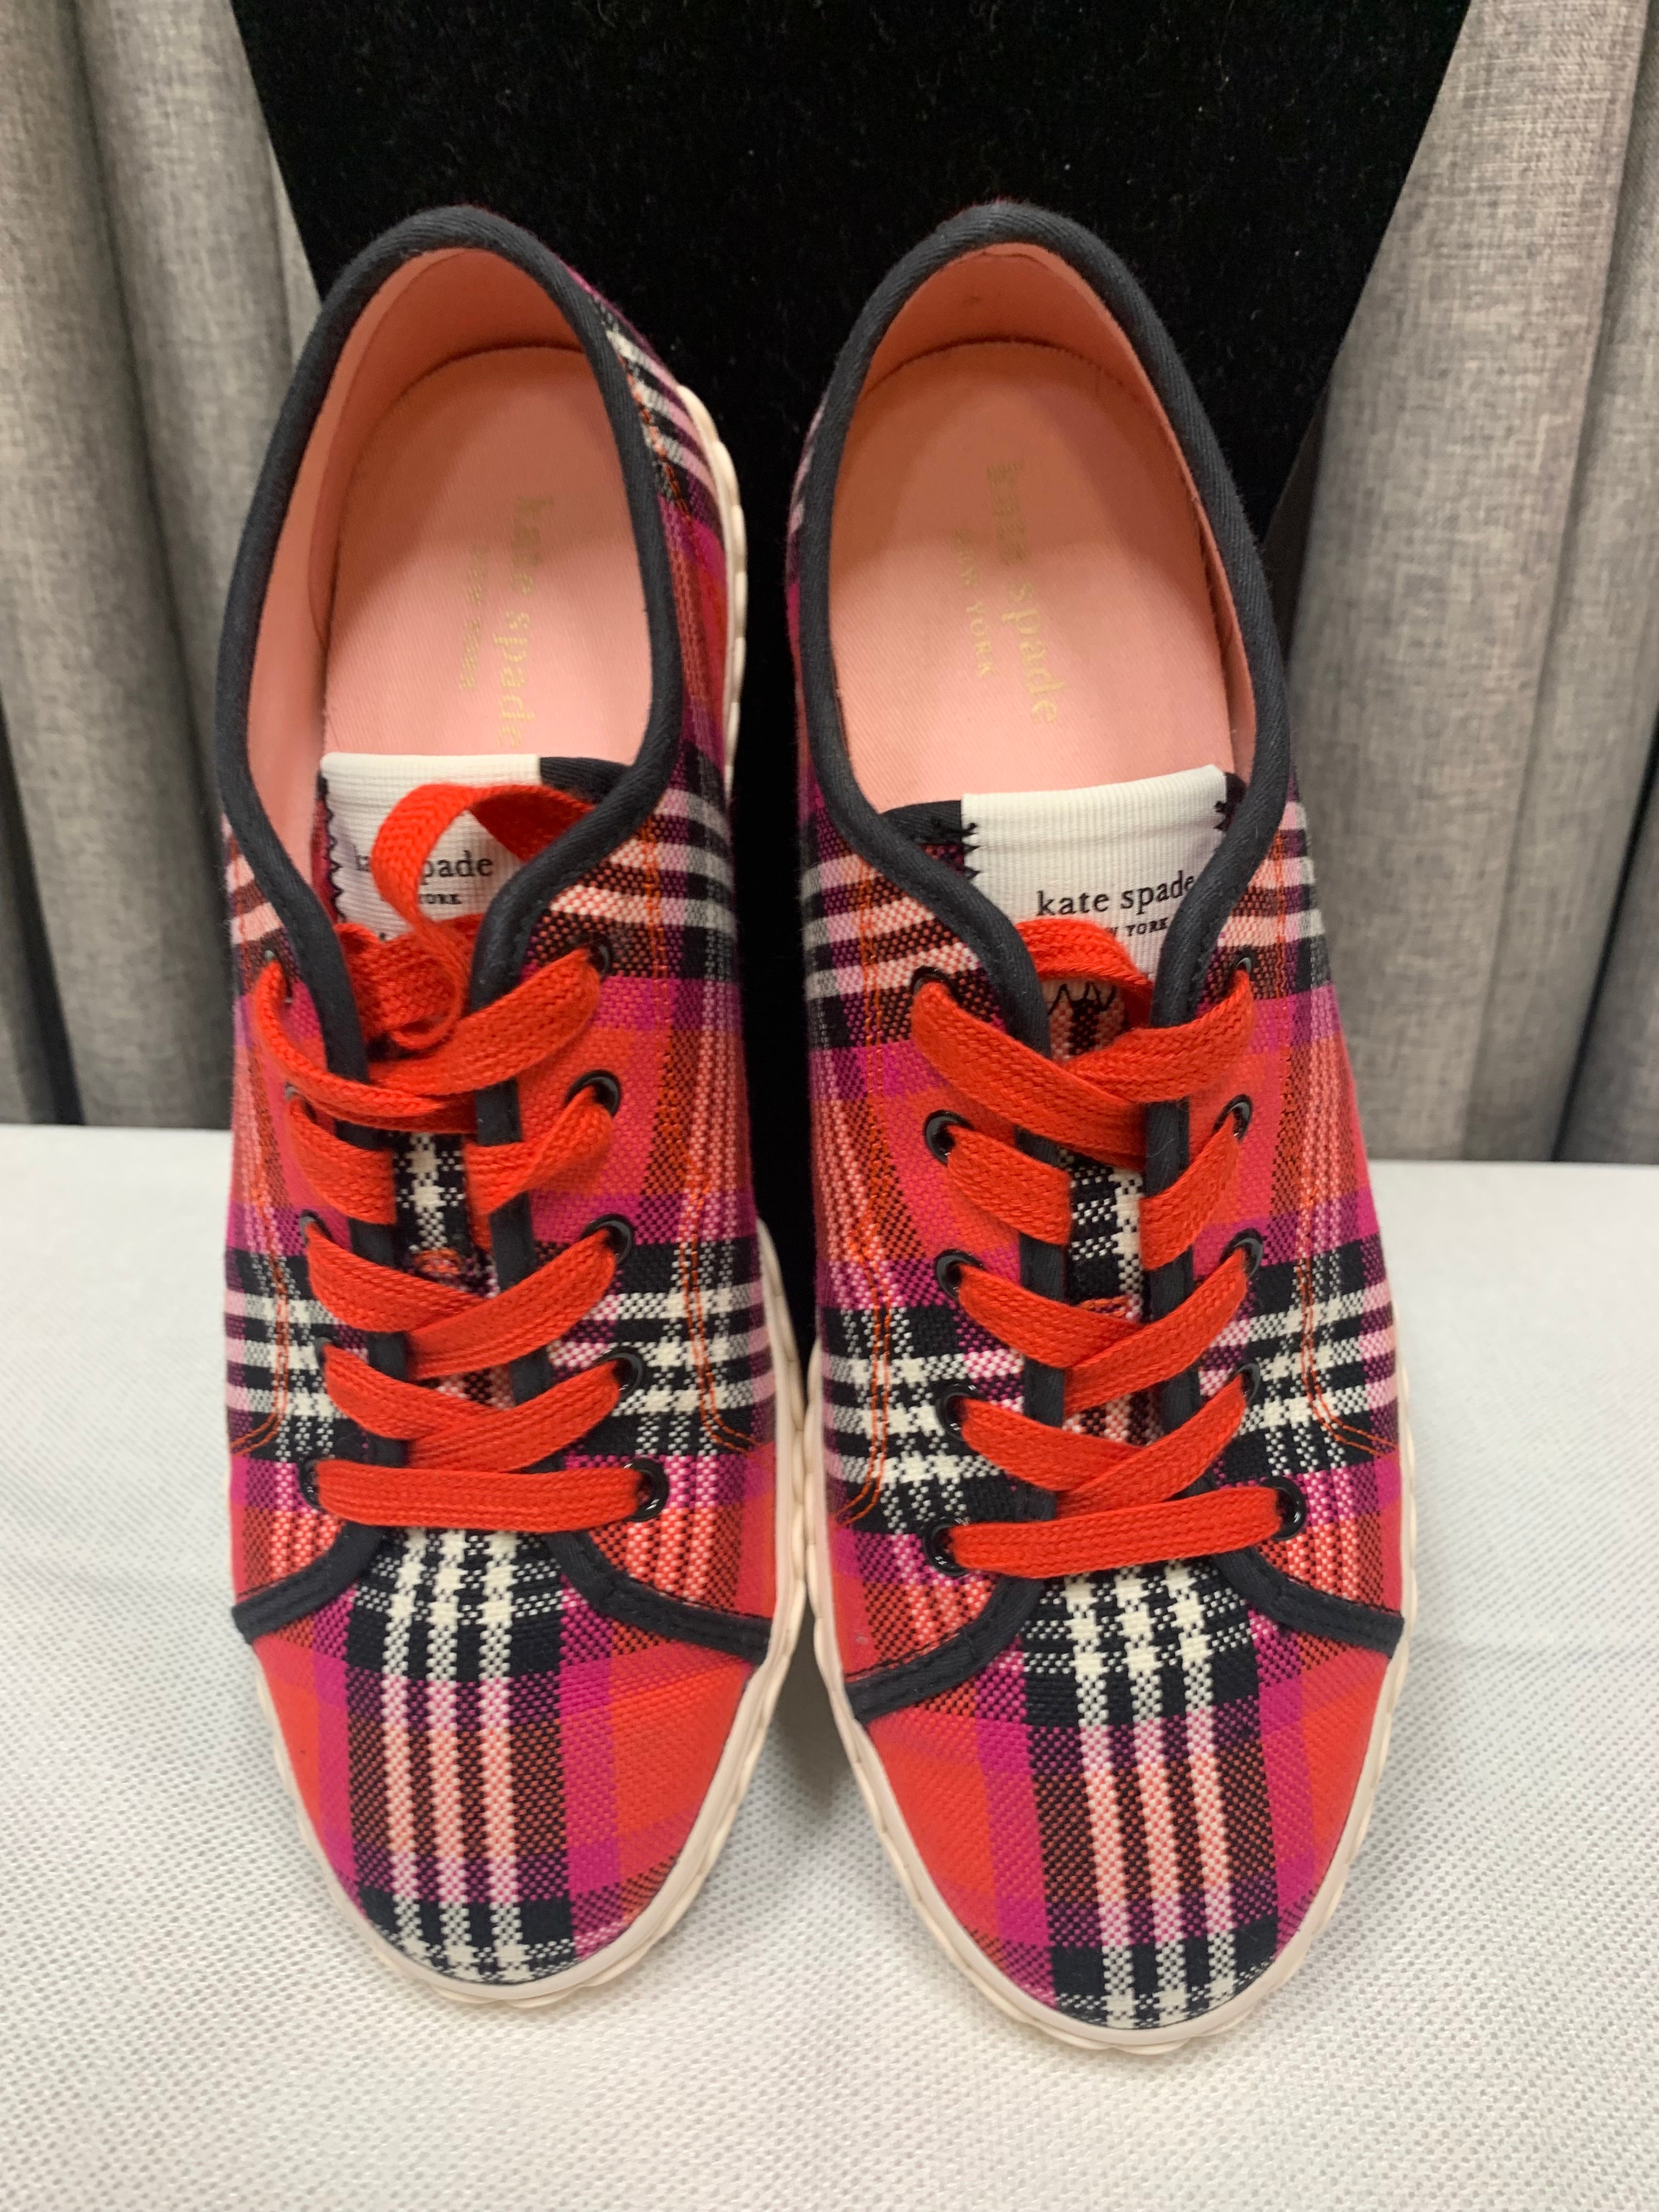 Kate Spade New York Women's Vale Sneakers / Size US 8B